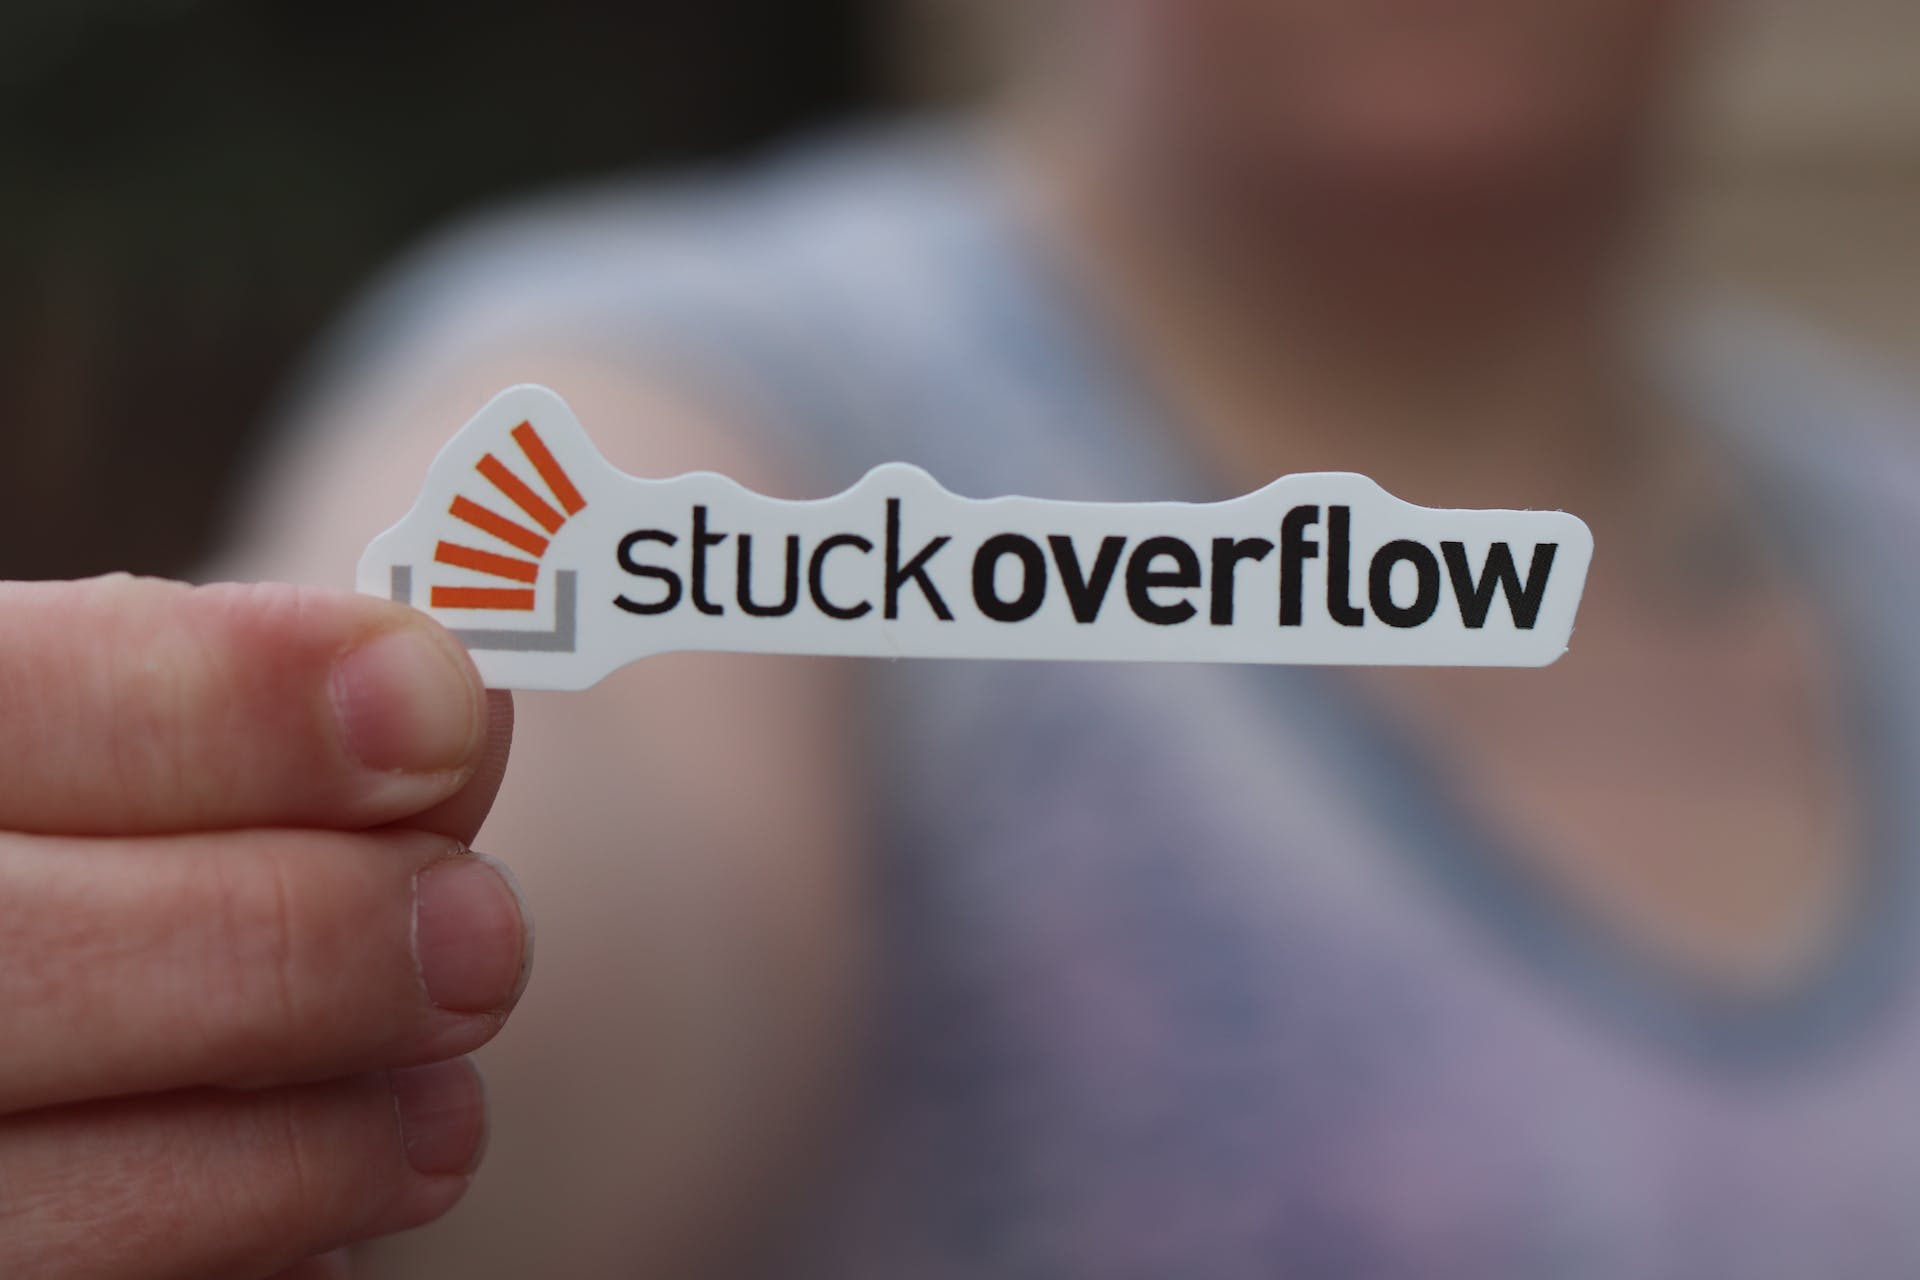 Altered Stack Overflow logo that says "Stuck Overflow".